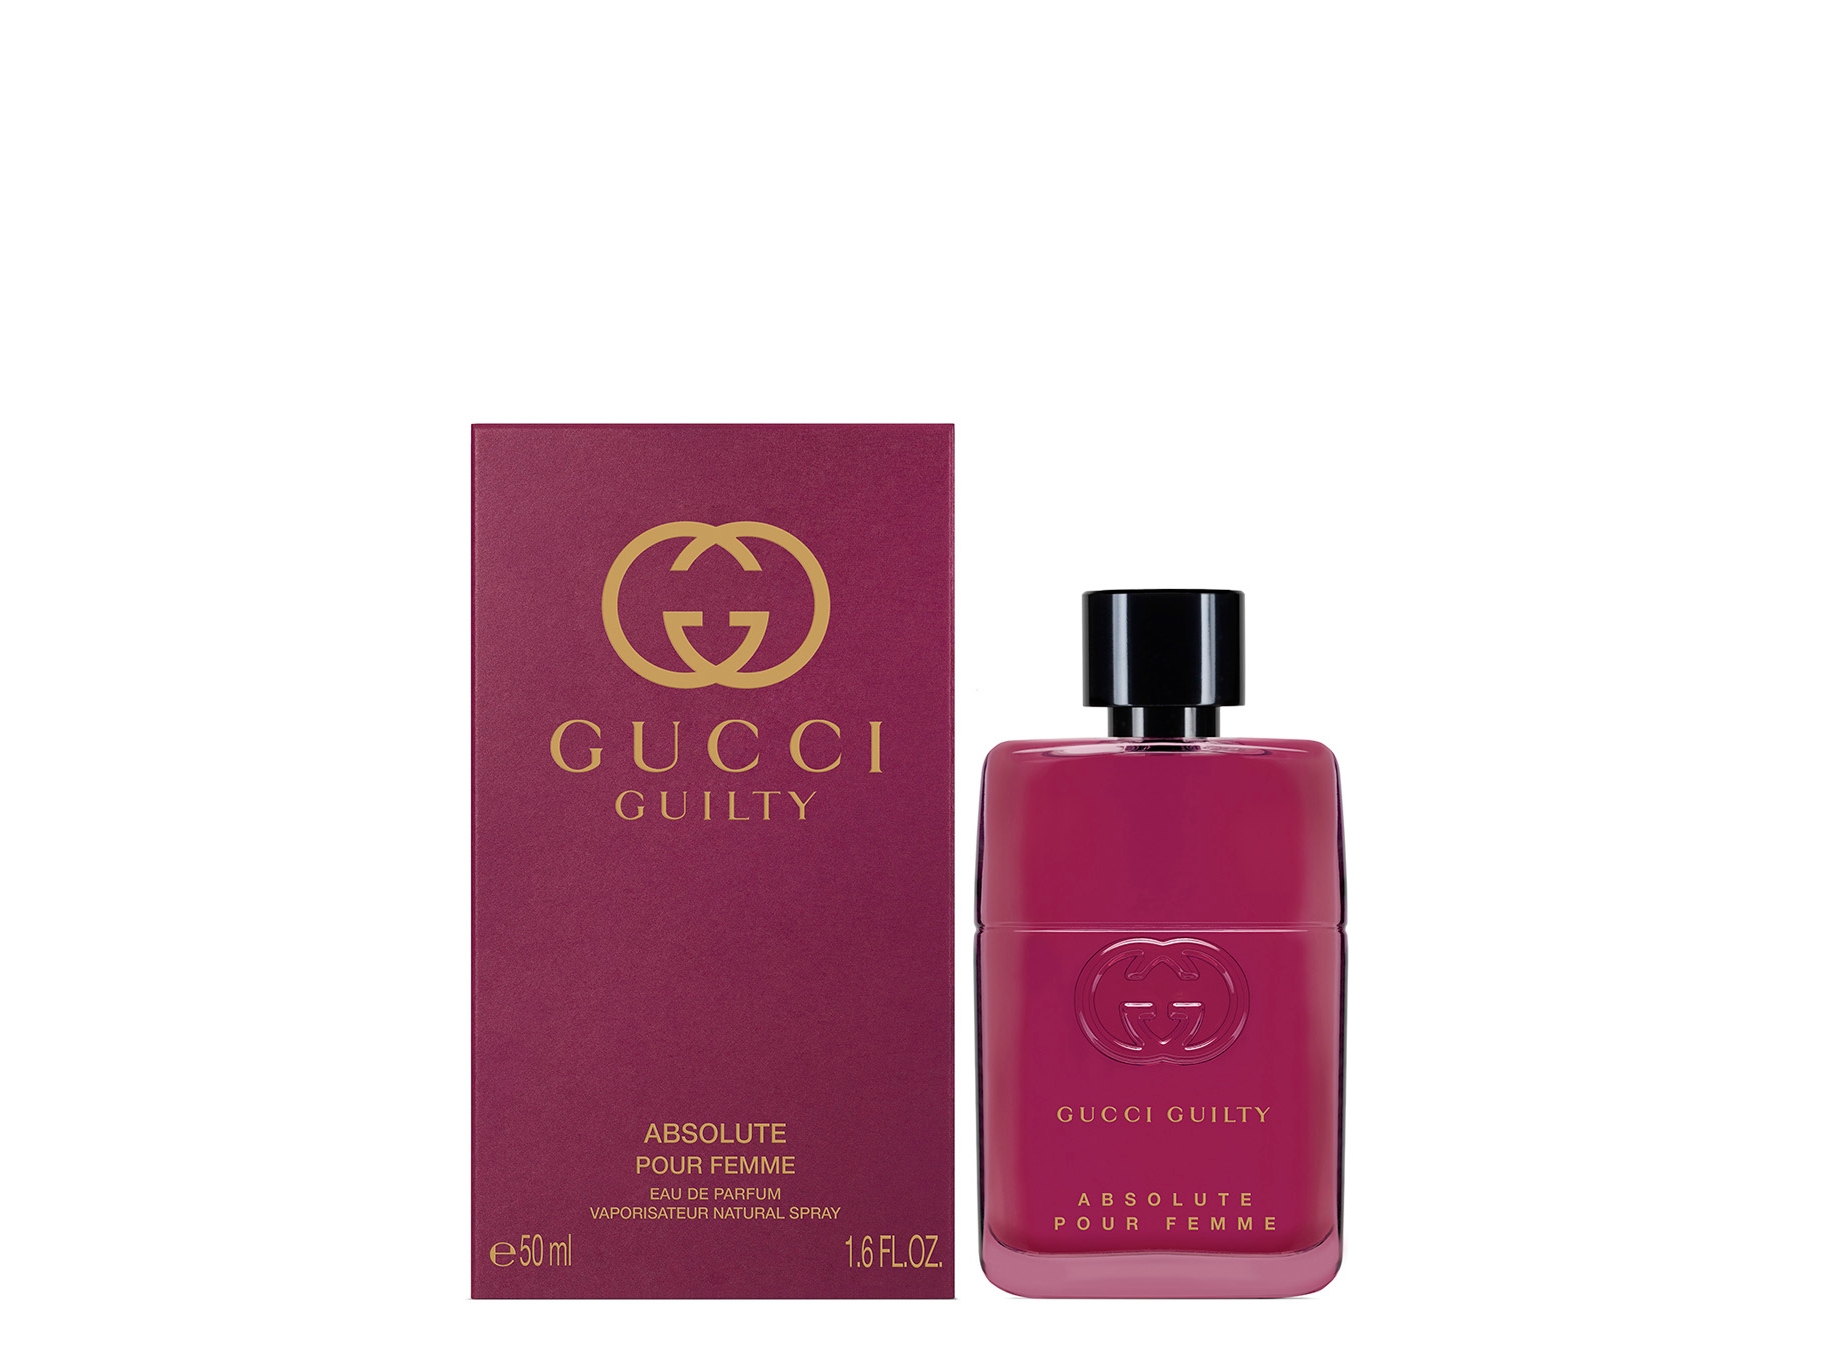 Gucci guilty absolute pour. Gucci guilty absolute pour femme EDP 50ml. Gucci guilty absolute pour femme. Гуччи Абсолют женские. Парфюм Shaik Gucci guilty absolute.